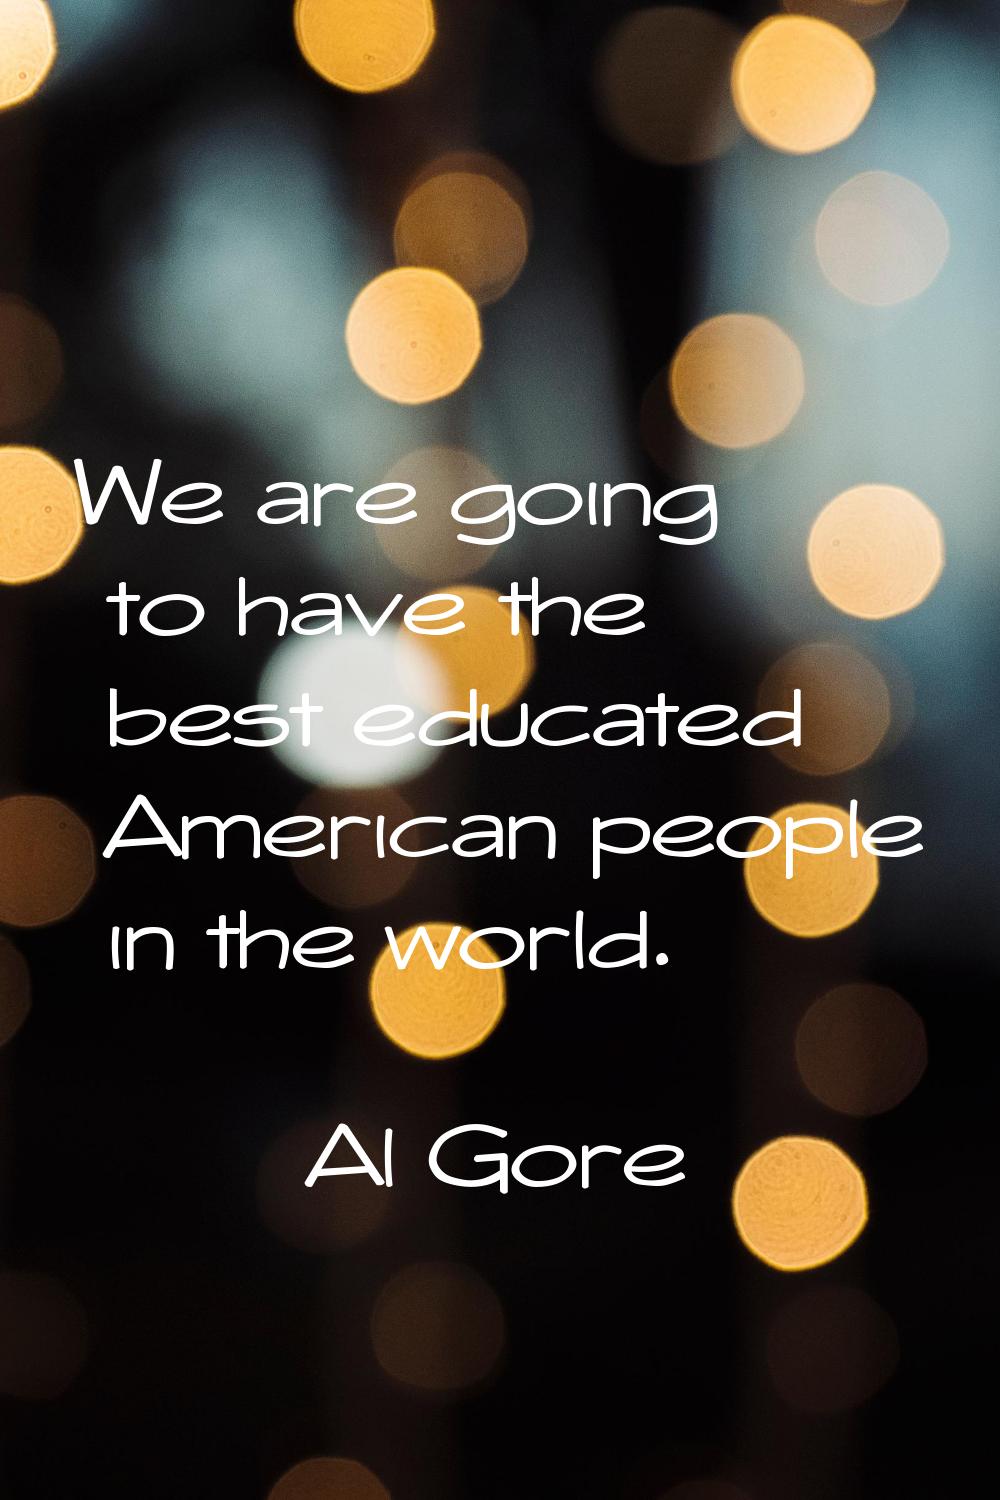 We are going to have the best educated American people in the world.